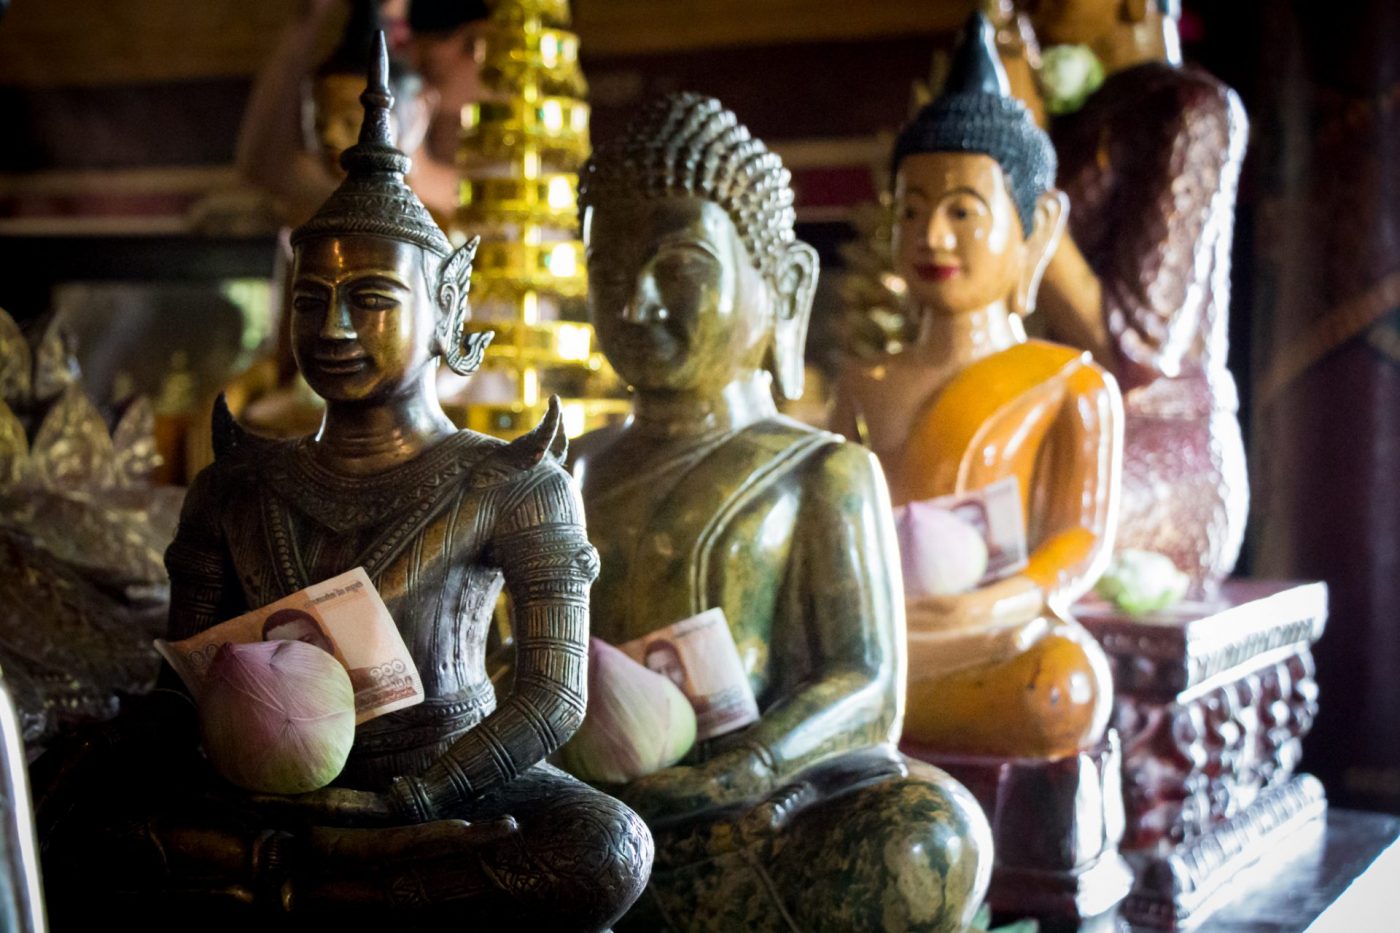 Offerings at Buddhist temple of Wat Phnom